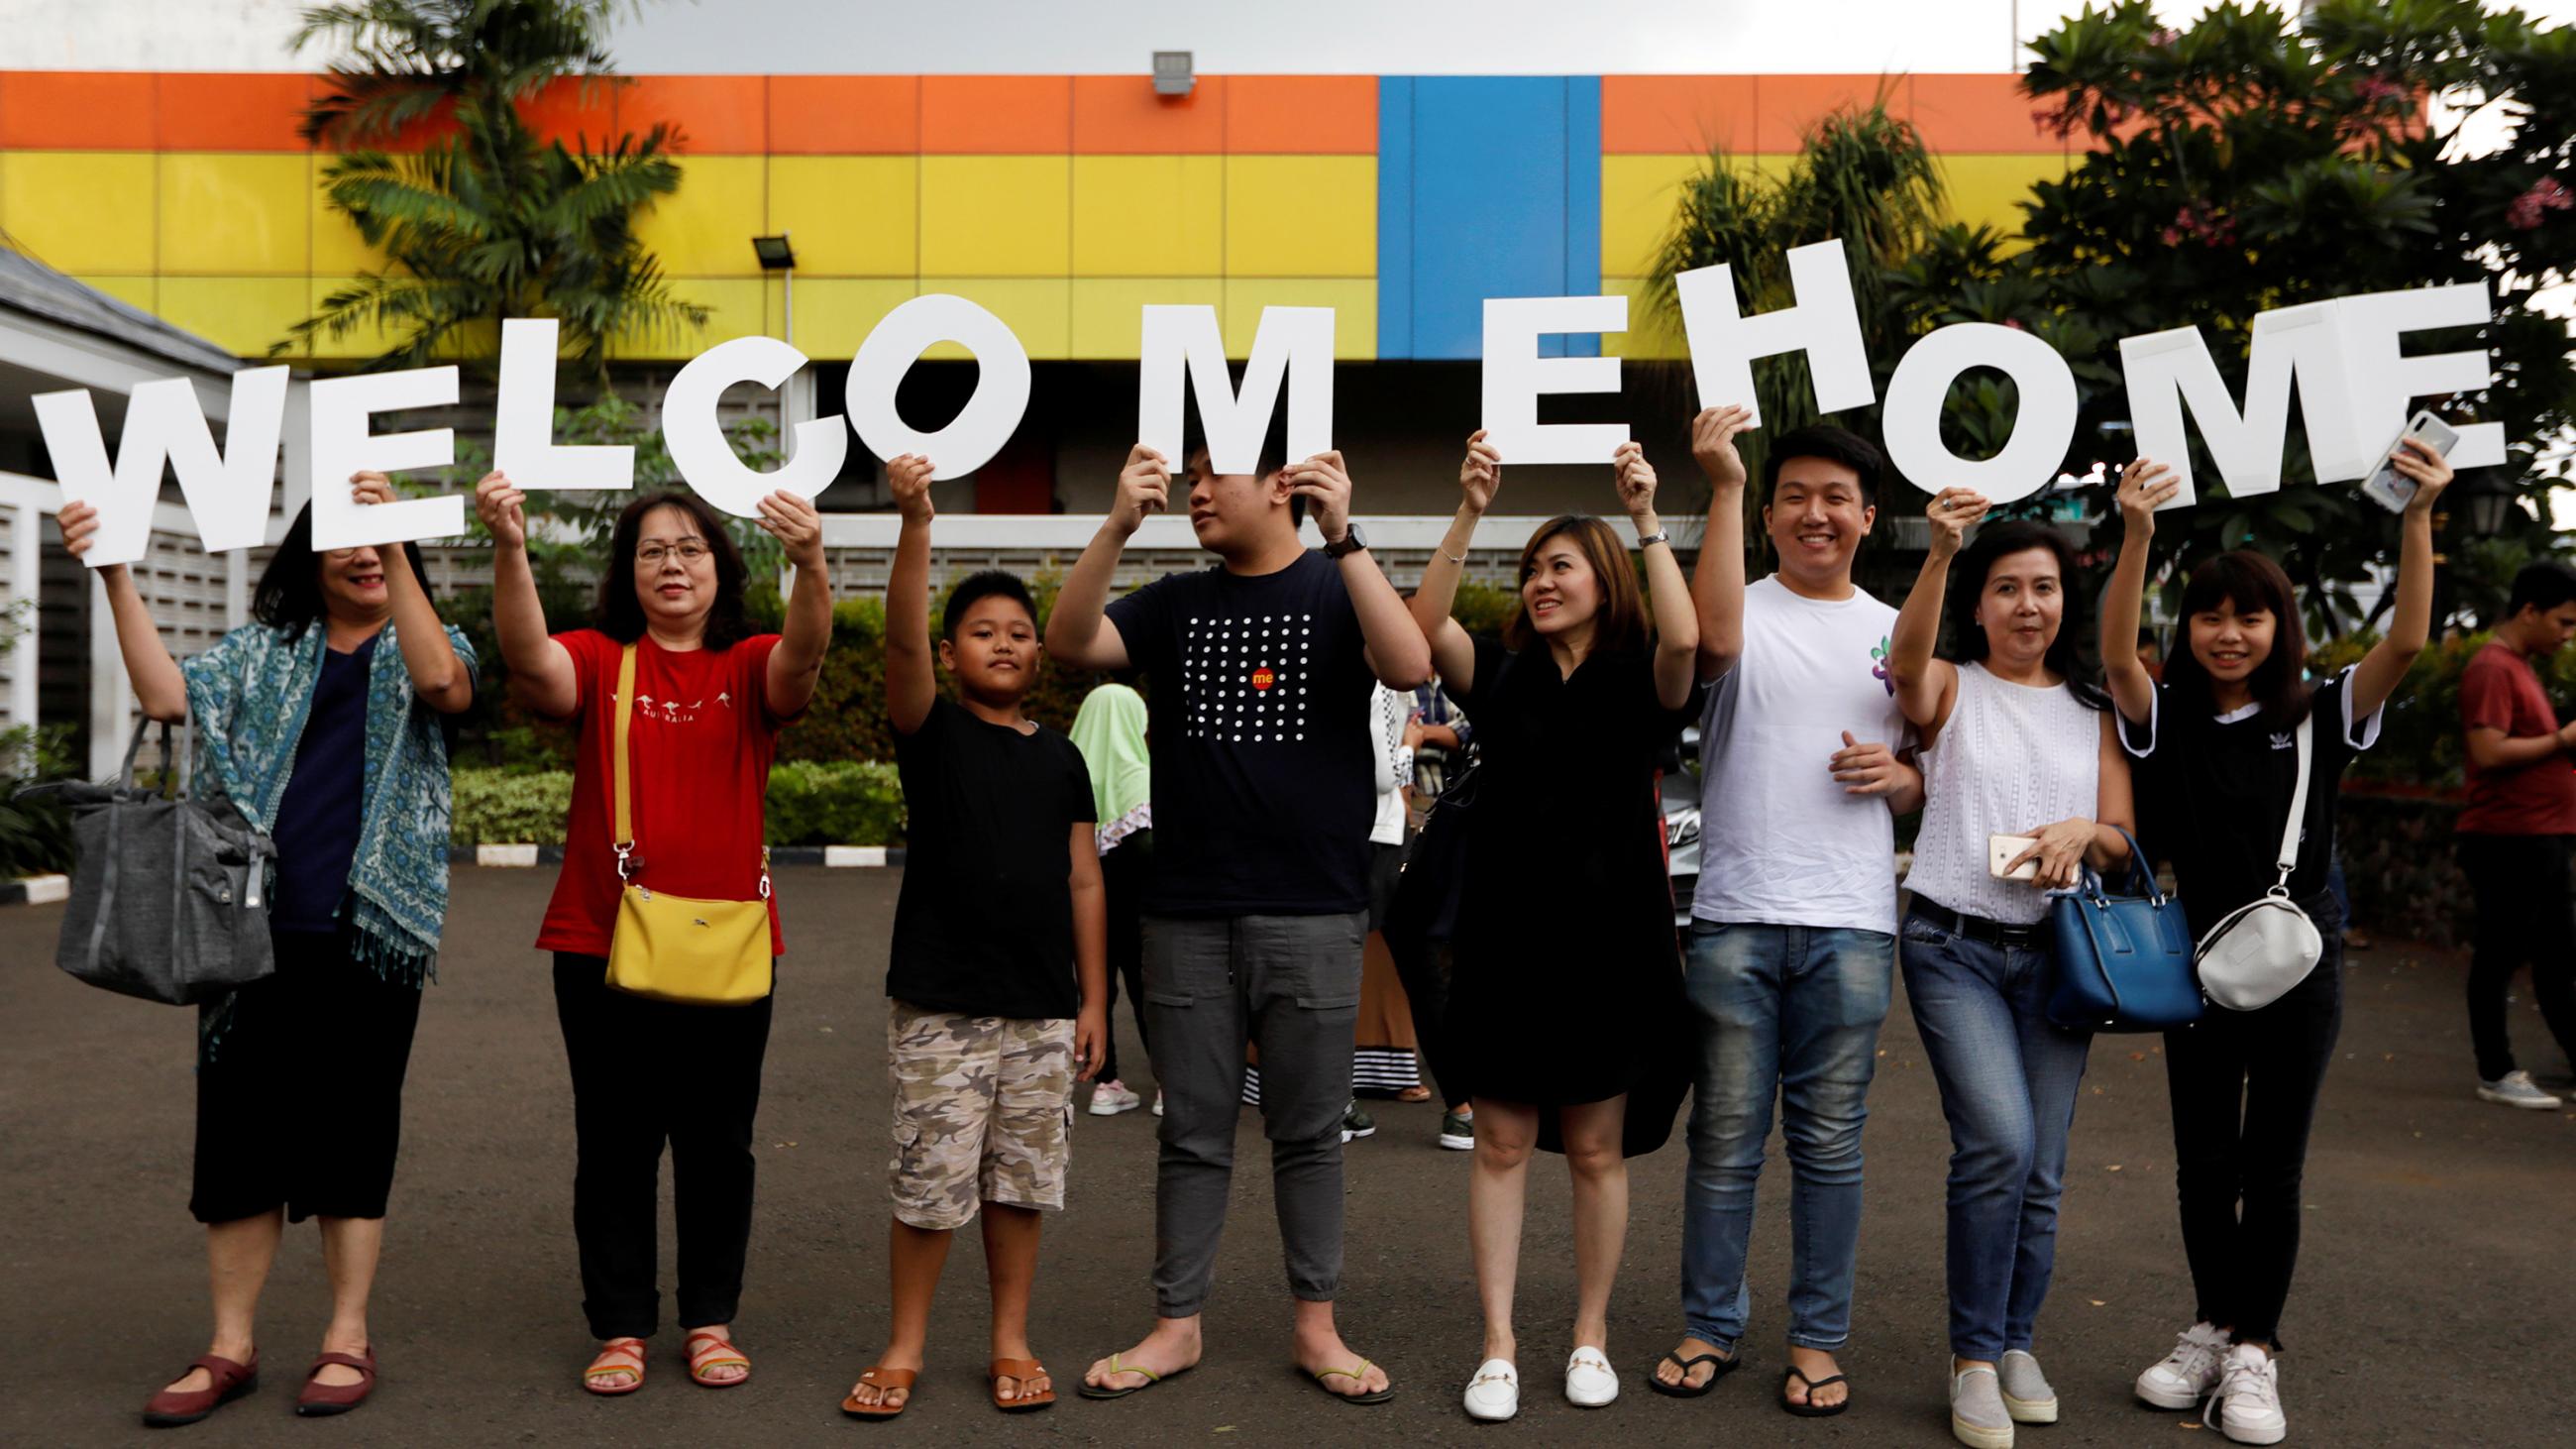  This is a fun photo of a large extended family standing in a parking lot holding a sign that reade welcome home. 